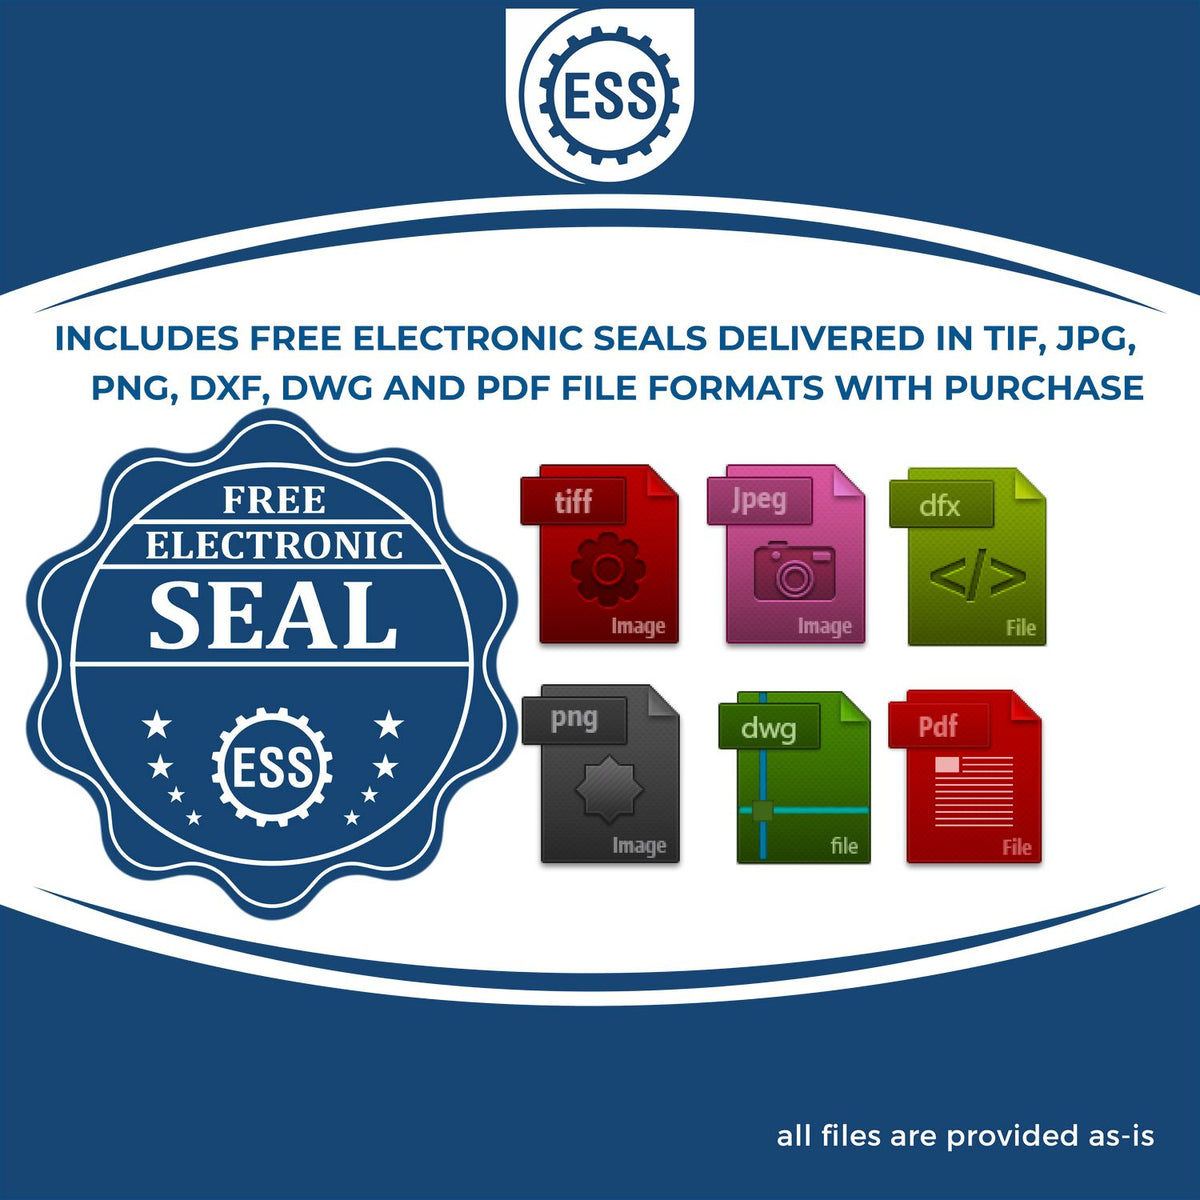 An infographic for the free electronic seal for the Handheld Tennessee Professional Geologist Embosser illustrating the different file type icons such as DXF, DWG, TIF, JPG and PNG.